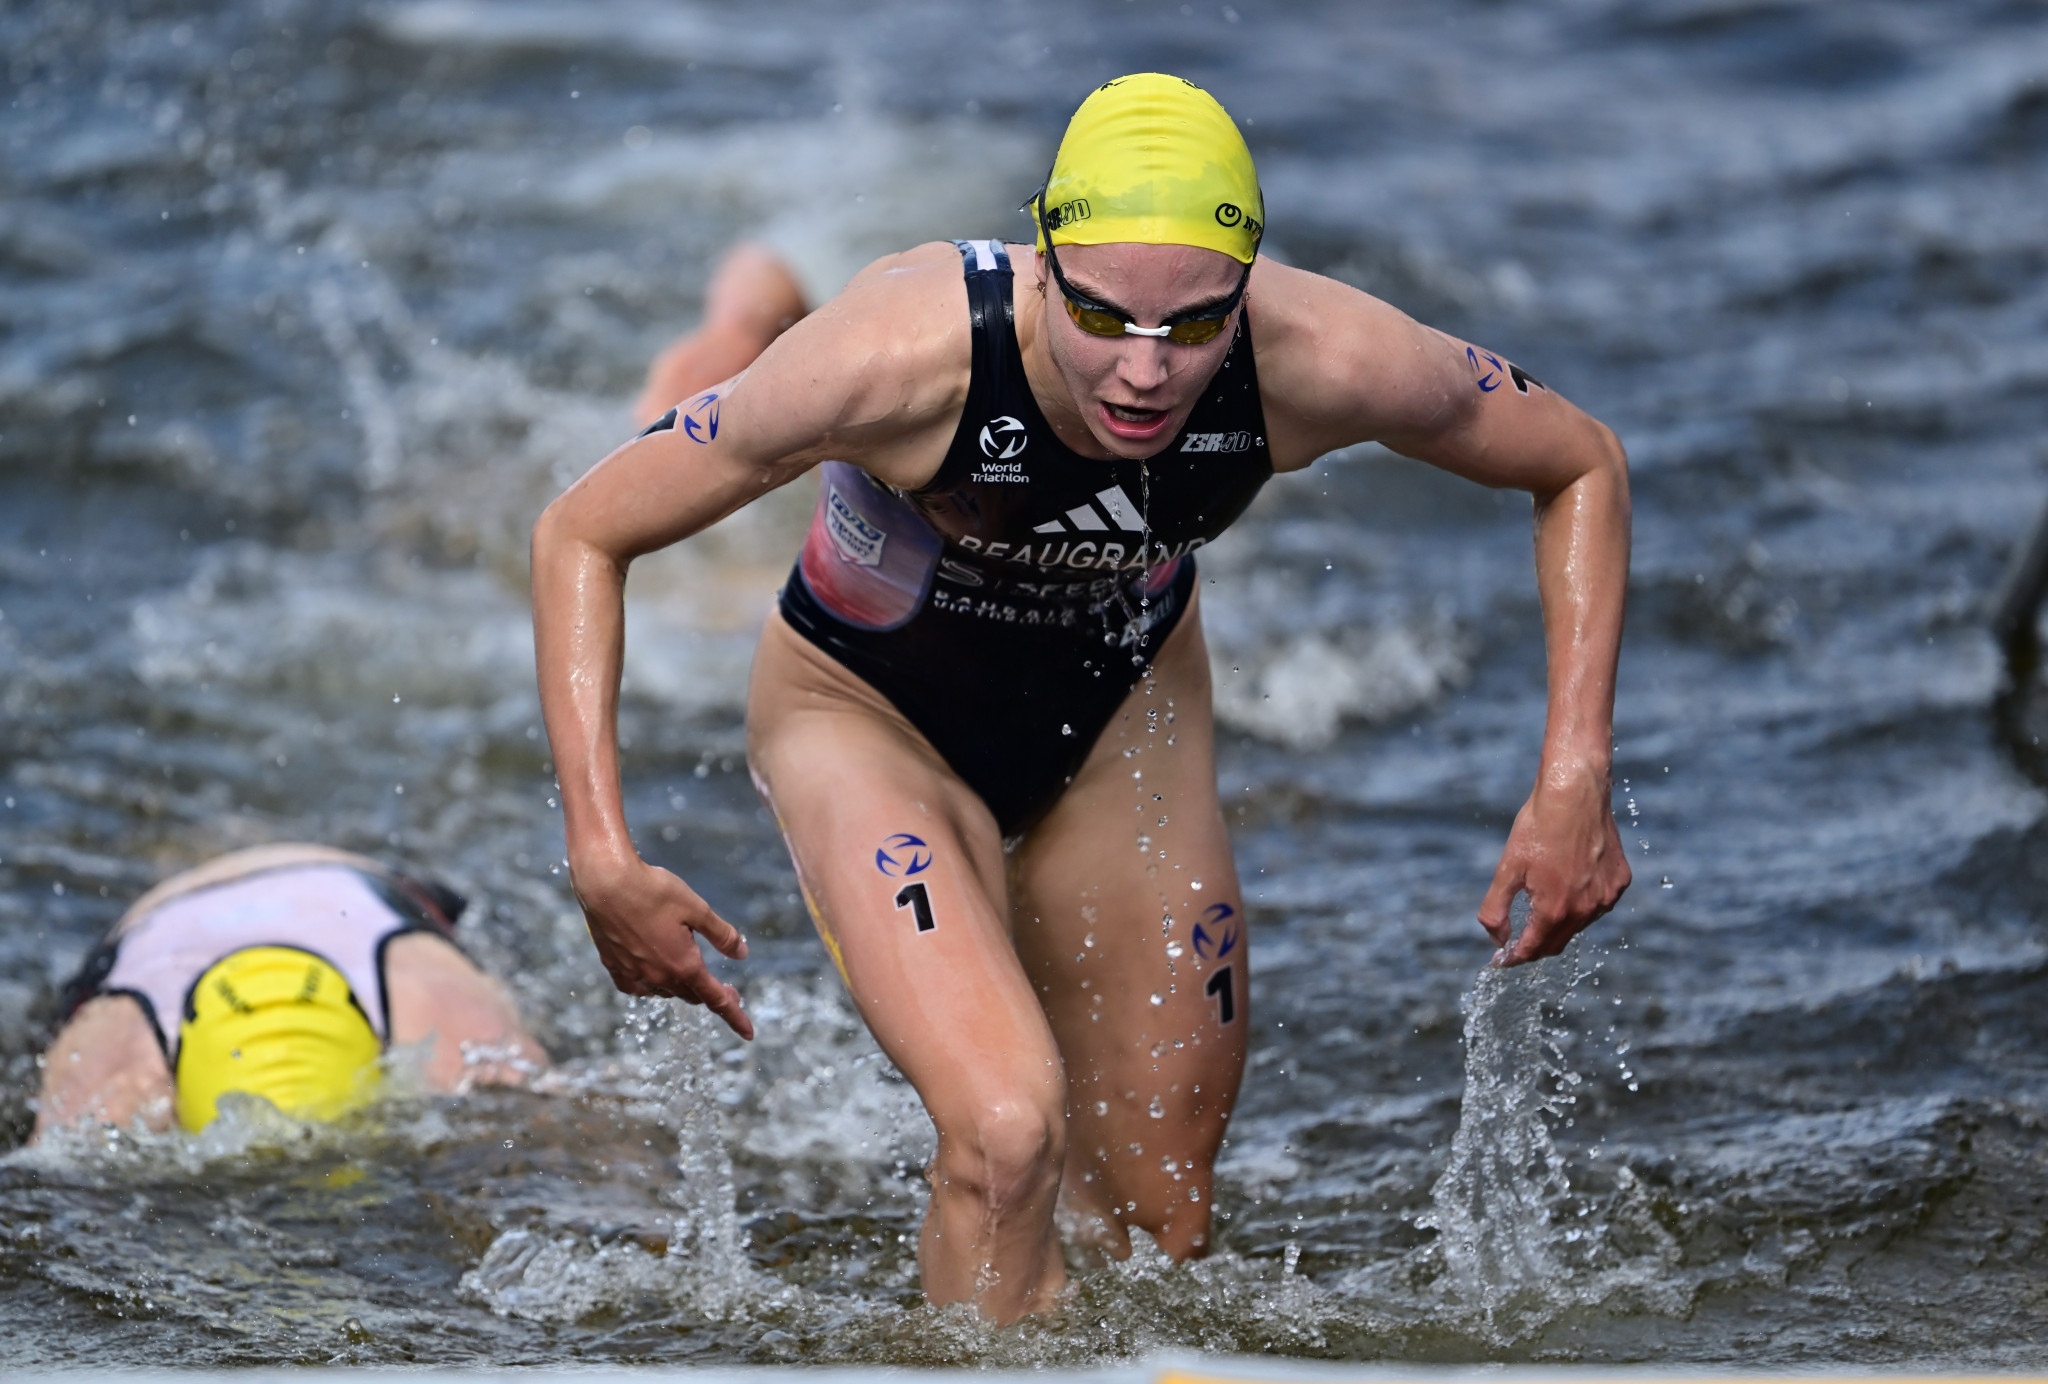 The Frenchwoman got off to the perfect start by distancing herself from the pack with an impressive swim ©World Triathlon